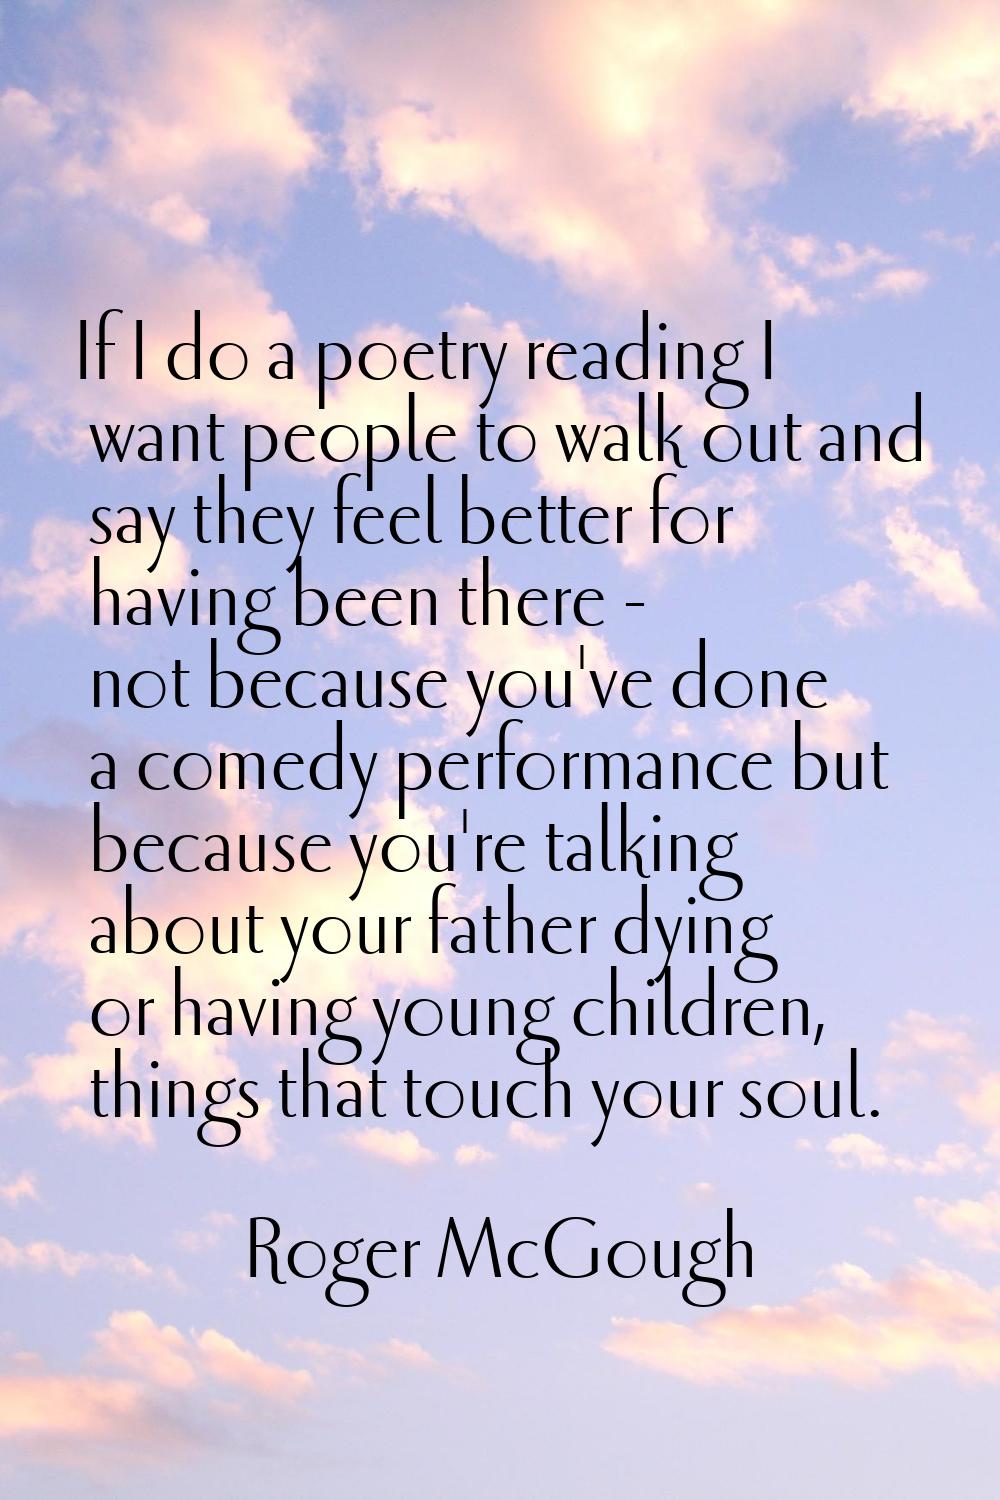 If I do a poetry reading I want people to walk out and say they feel better for having been there -